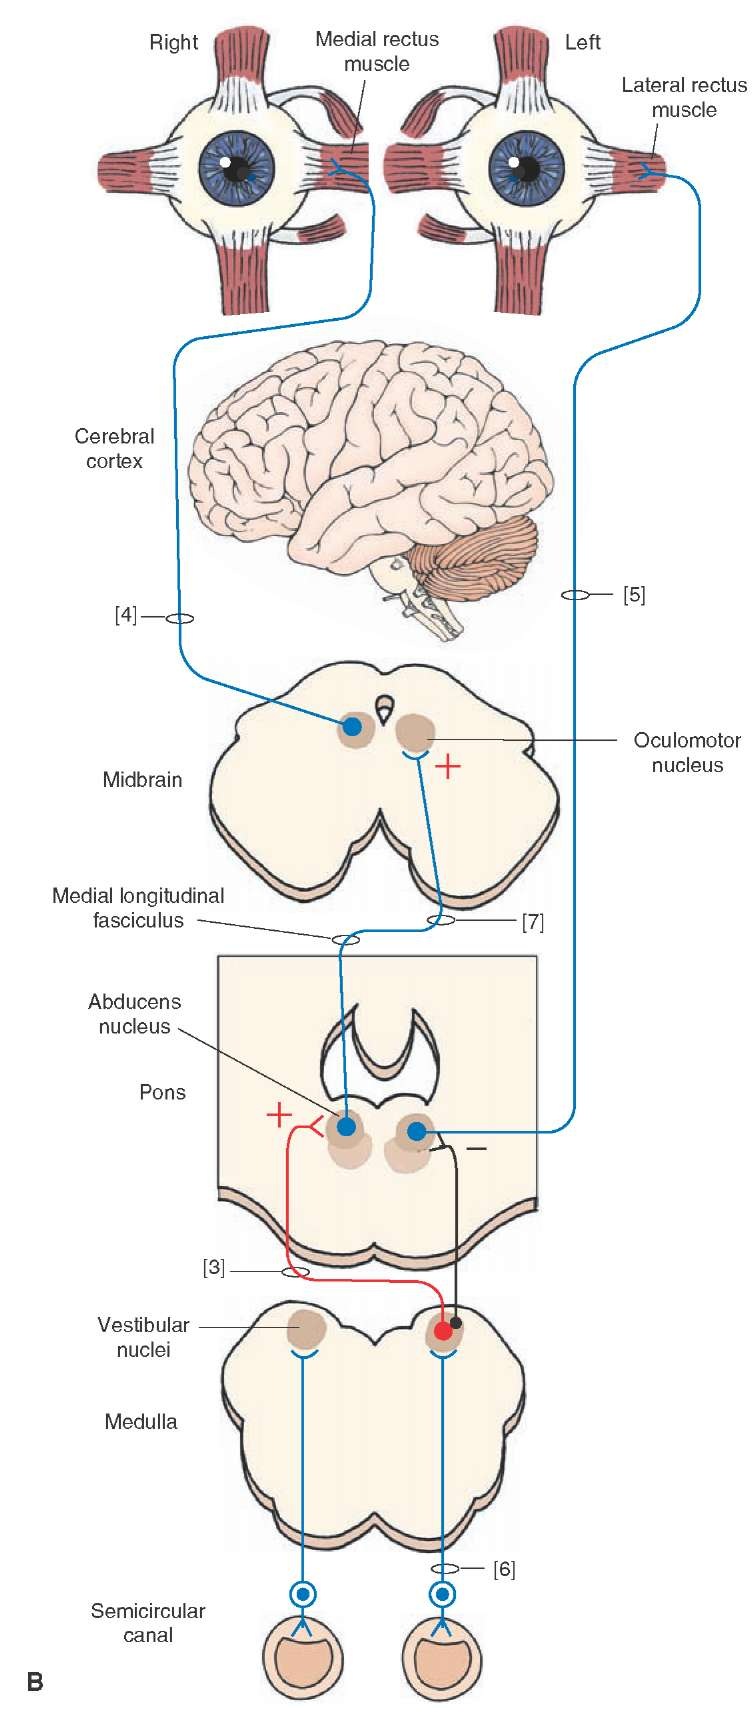 (B) This diagram illustrates other important relationships essential for conjugate gaze and the regulation of the vestibular-ocular reflex. An essential element in this relationship includes vestibular inputs to vestibular nuclei (6). Vestibular nuclei project to the ipsilateral cranial nerve (CN) VI, which is inhibitory, and to the contralateral CN VI, which is excitatory (3). Projections from CN VI to the contralateral CN III are also excitatory (7). The medial longitudinal fasciculus contains fibers passing from vestibular nuclei and the pontine gaze center to CN VI and III as well as fibers passing from CN VI to the contralateral CN III. To illustrate how these relationships function, assume that the head is rotated to the left. The net result is that the eyes are rotated to the right. In order for this to be achieved, there must be contraction of the right lateral rectus and left medial rectus muscles. Activation of these muscles is induced by initial activation of vestibular nerve fibers originating from the left horizontal semicircular canal, which project to vestibular nuclei. Projections from left vestibular nuclei to the right abducens nucleus are excitatory, causing contraction of the lateral rectus muscle of the right eye. Because the projection from the right abducens nucleus to the left oculomotor nucleus is also excitatory, activation of the right abducens nucleus results in excitation of the left medial rectus muscle. Because the projection from the left vestibular nucleus to the ipsilateral (left) abducens nucleus is inhibitory, the left lateral rectus muscle will have a greater tendency not to contract; likewise, the excitatory projection from the left abducens nucleus to the right oculomotor nucleus would not be activated because of the inhibitory input from the vestibular nuclei; therefore, reducing the likelihood of excitation of the right medial rectus muscle. 